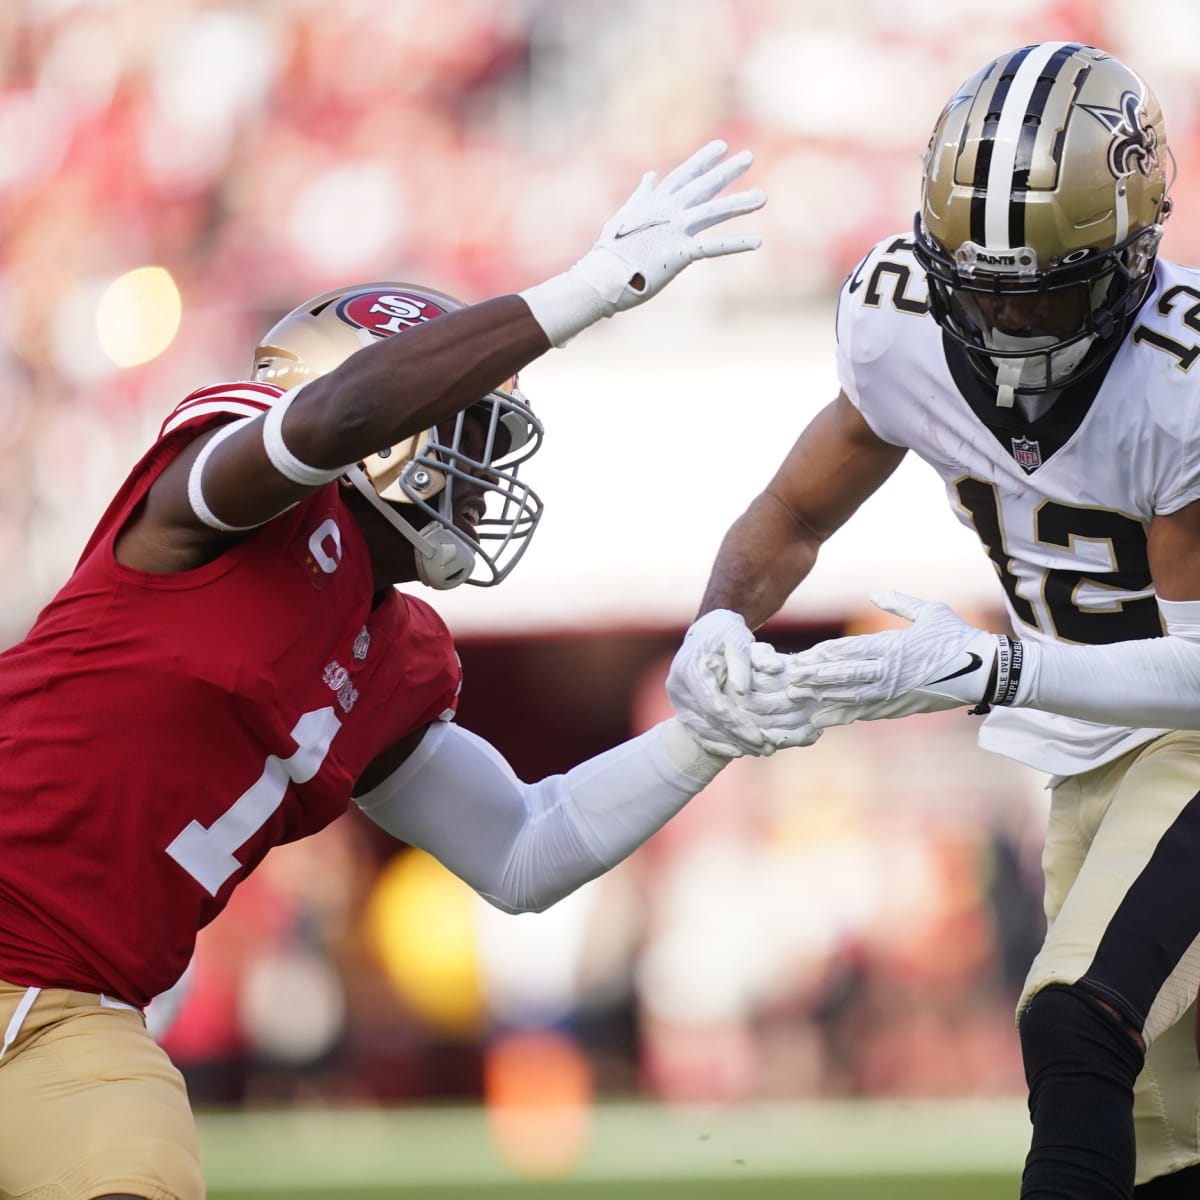 49ers ended the Saints' streak of 332 games without a shutout